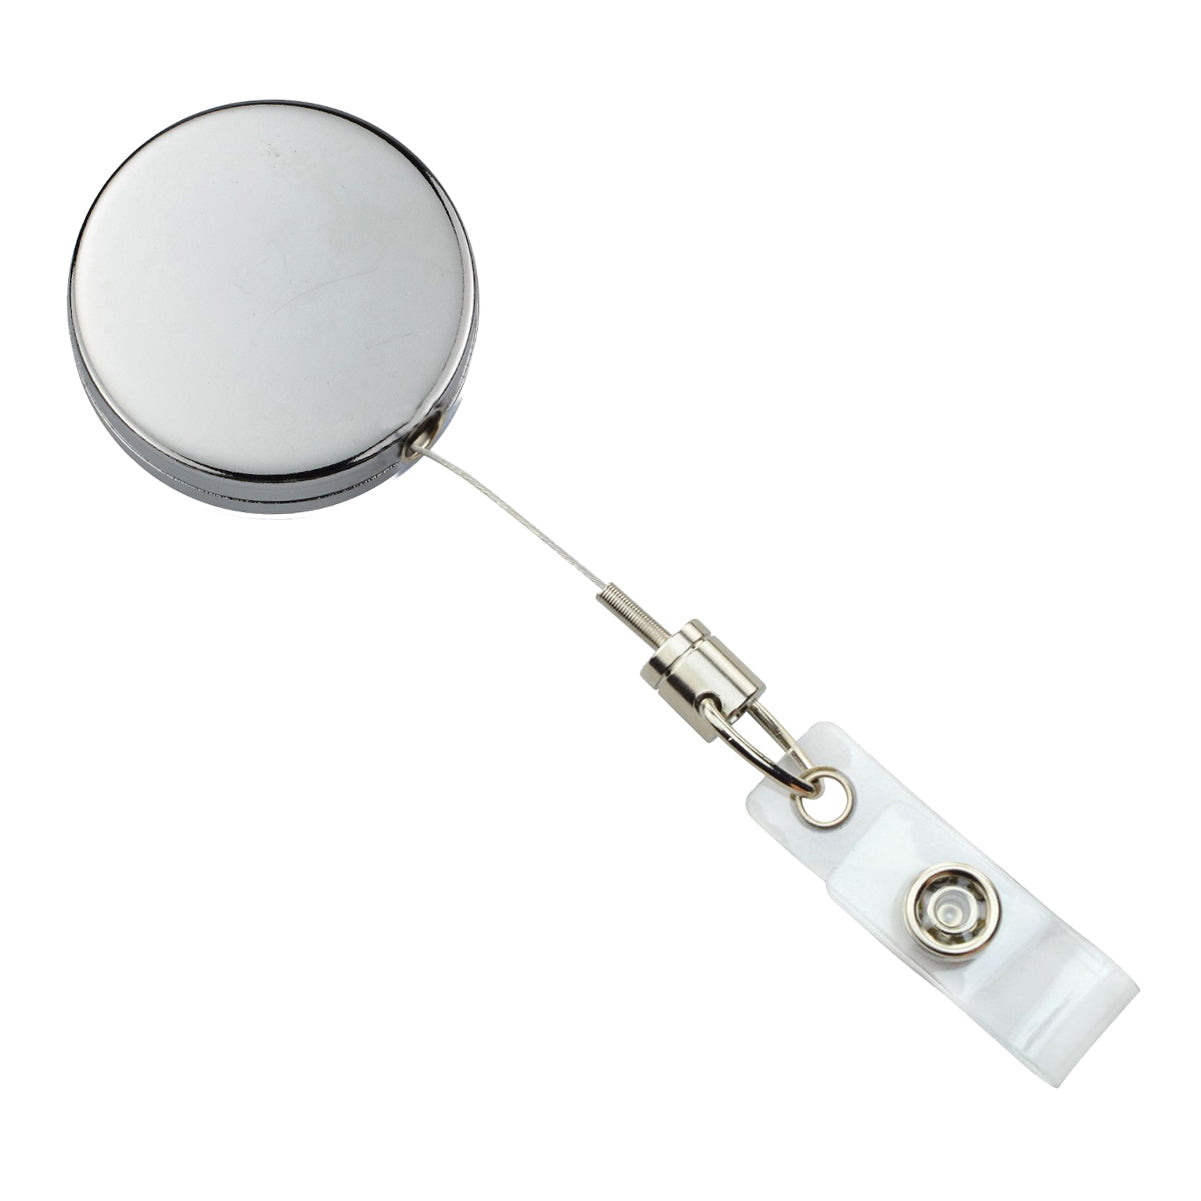 Silver Chrome Plastic Badge Reel with Belt Clip (p/n 2120-3030)